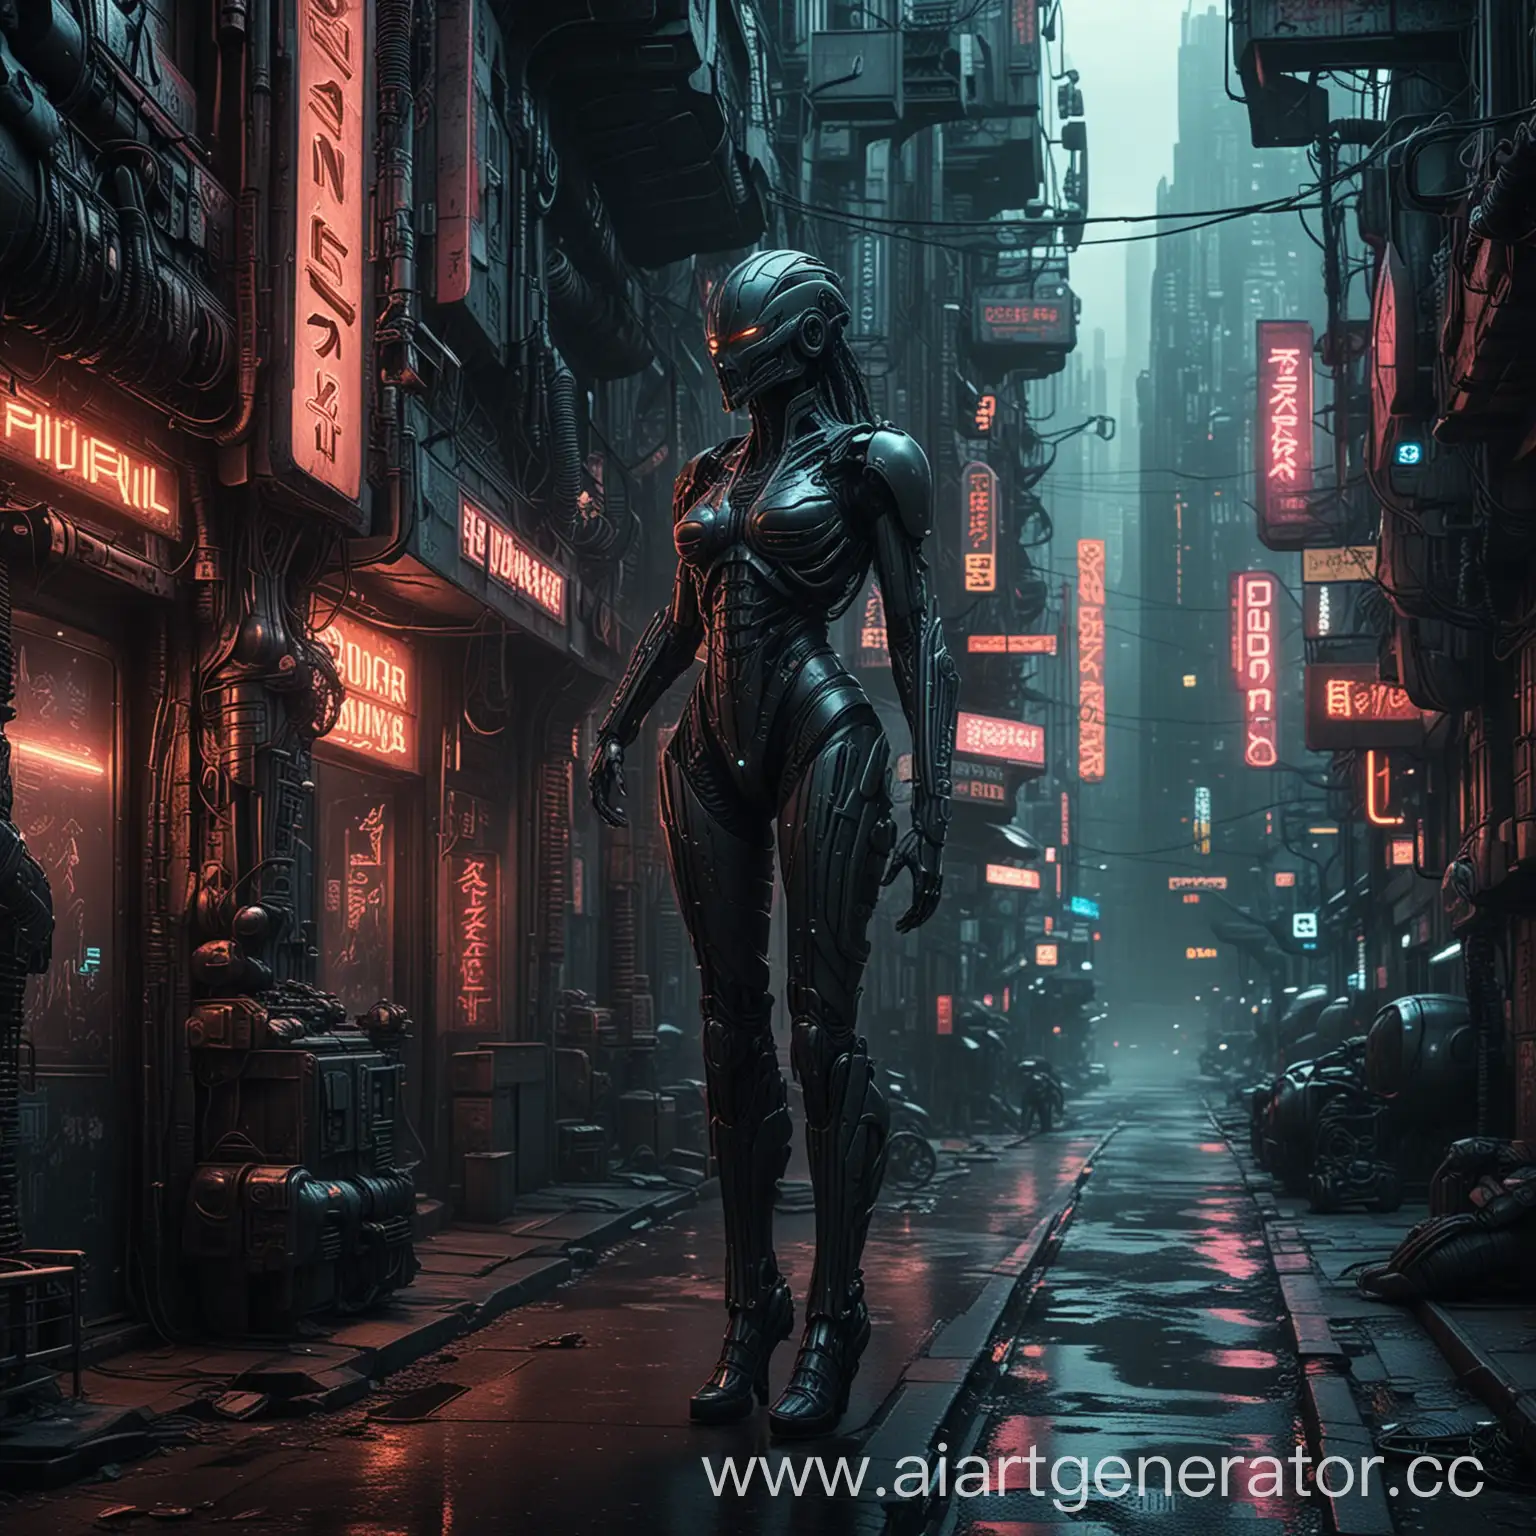 Futuristic-Cyberpunk-Knights-Amid-Neon-Signs-in-Giger-Style-Metropolis